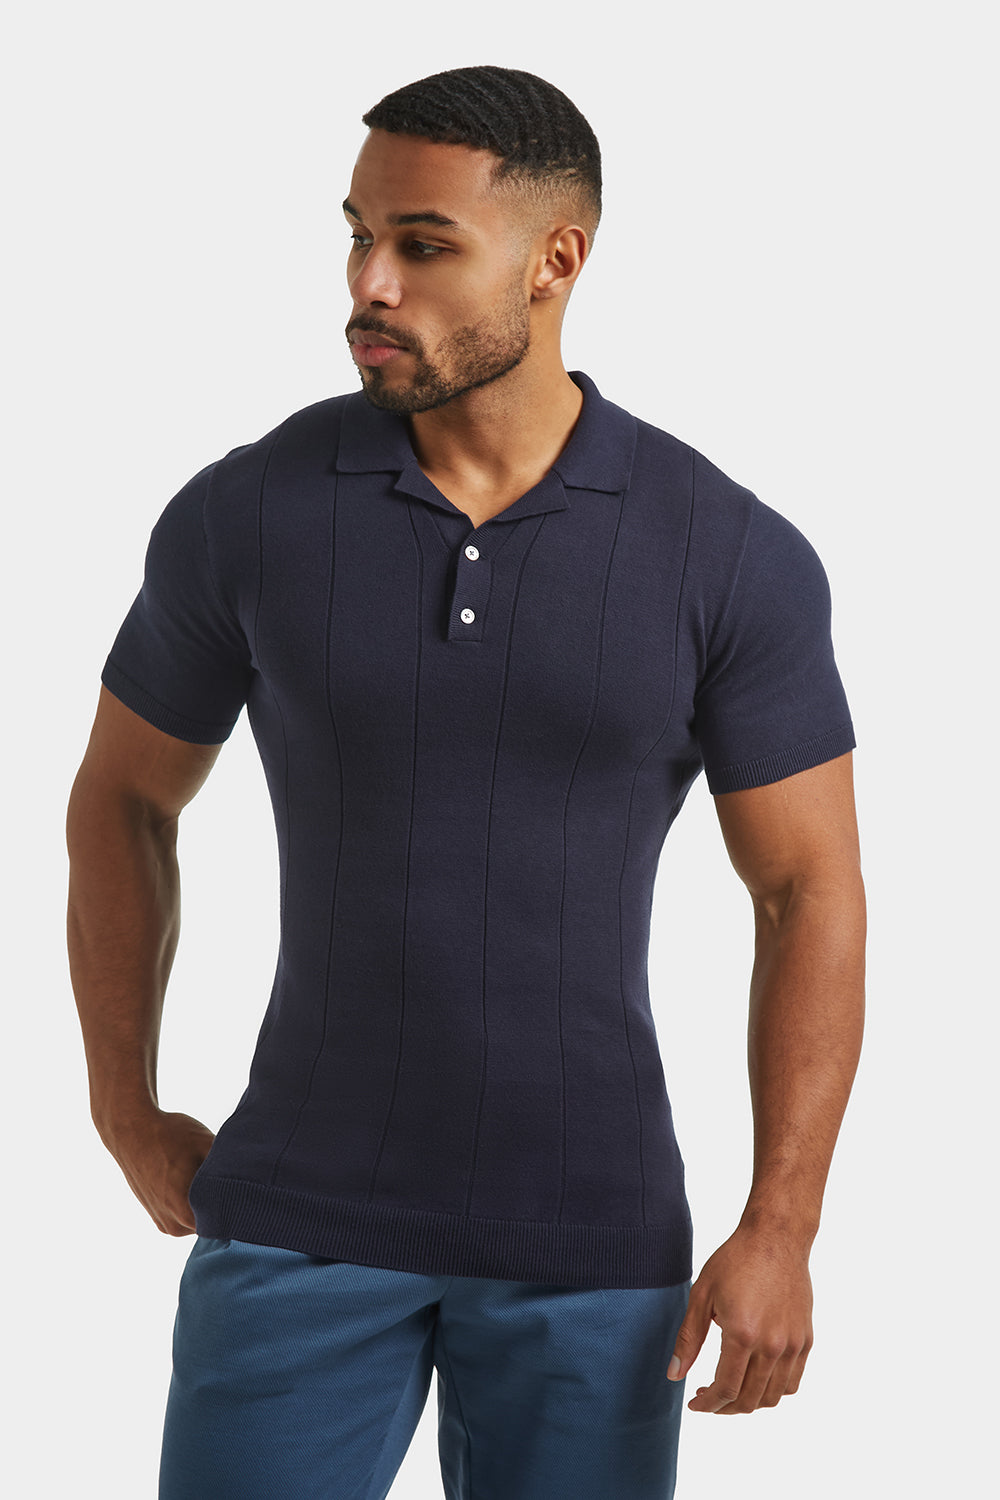 Ribbed Polo in Truffle - TAILORED ATHLETE - ROW